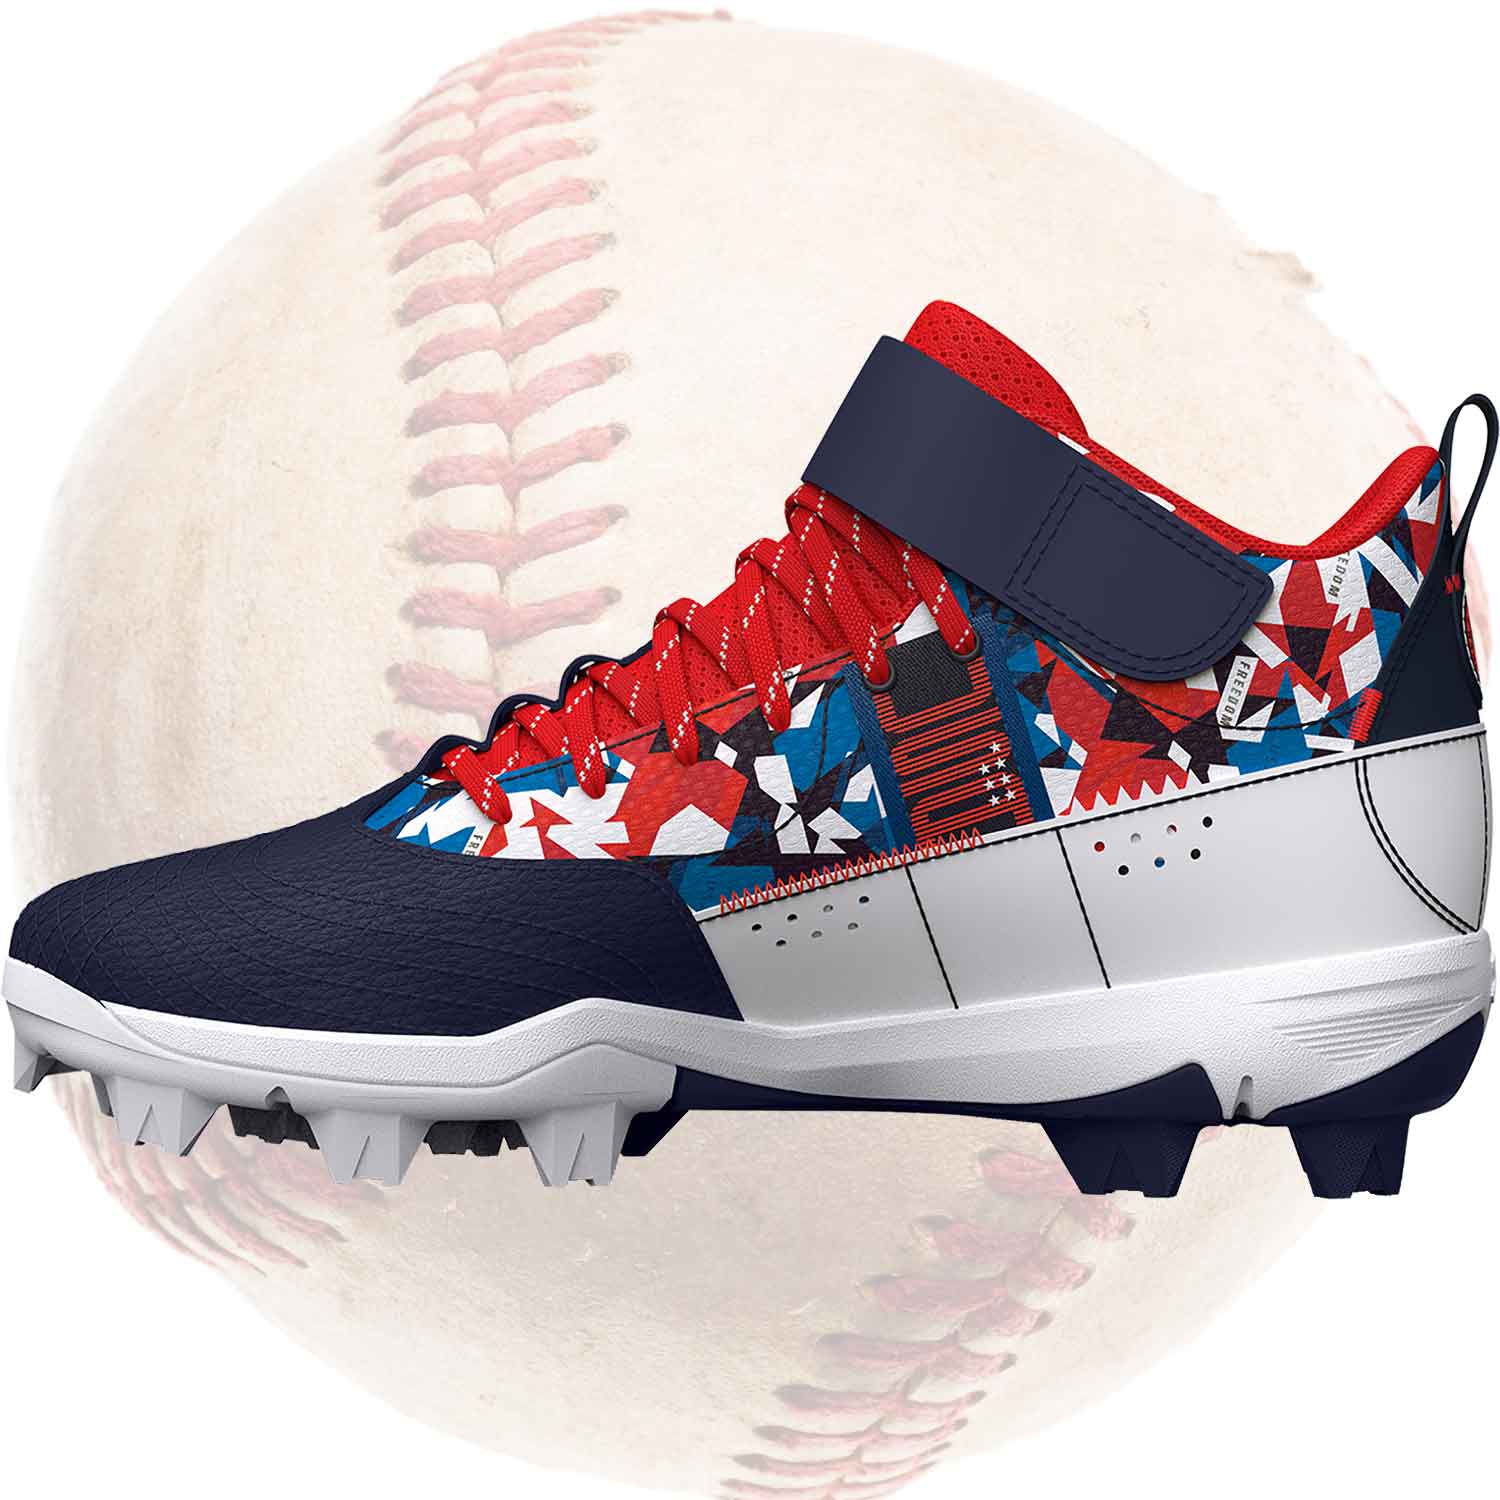 Under Armour Harper 7 Mid USA RM Jr Youth Kids Baseball Cleats